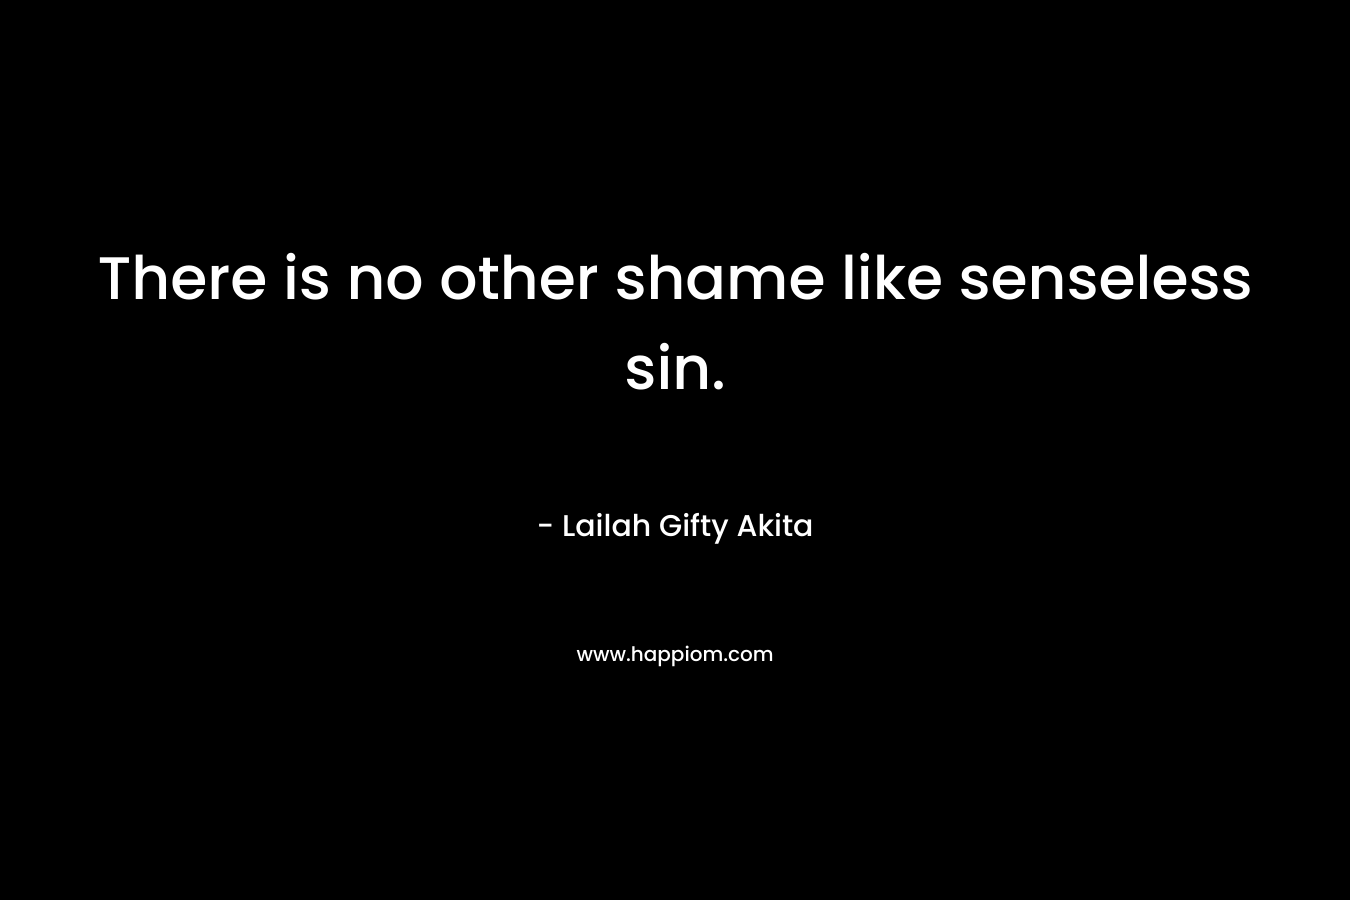 There is no other shame like senseless sin.